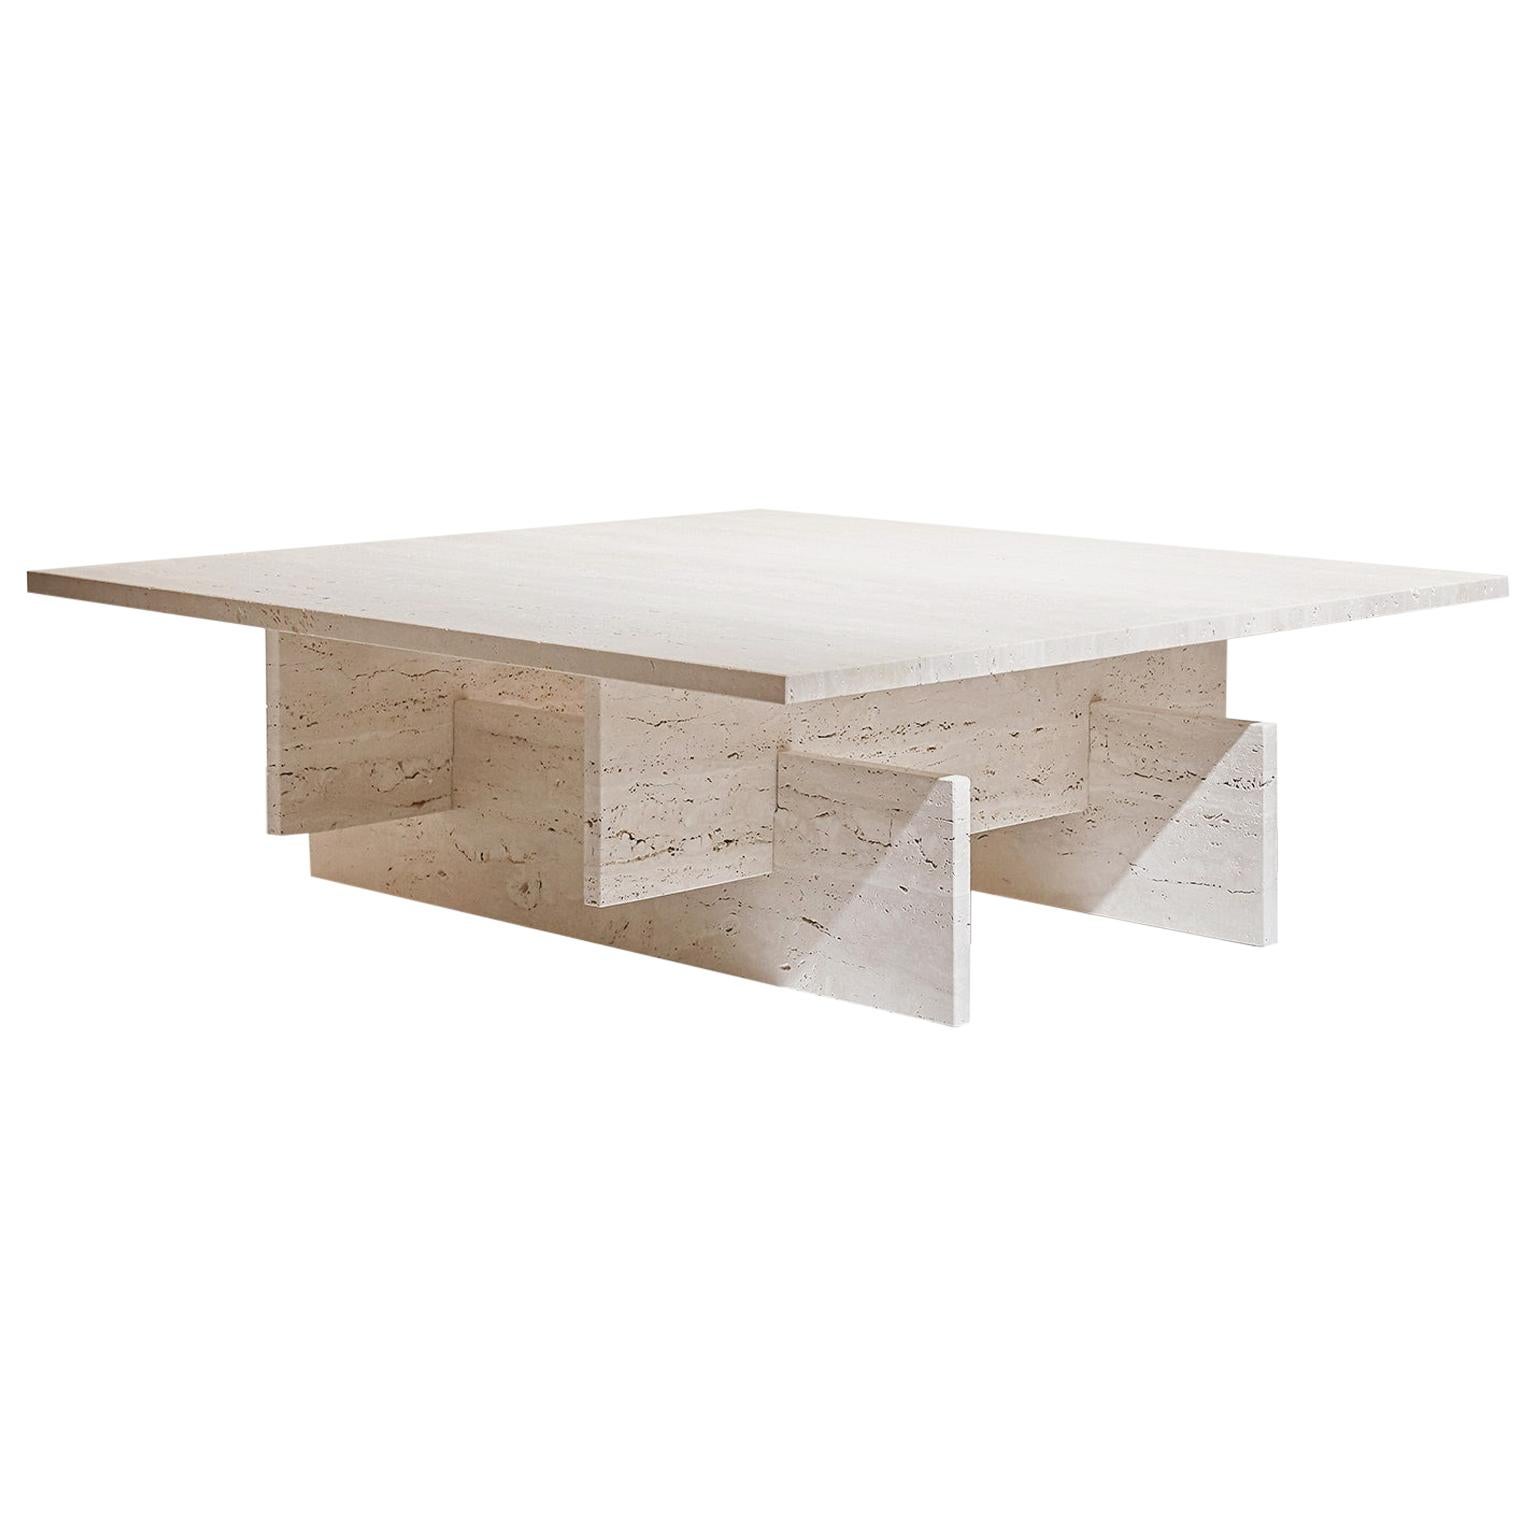 “Fit Table” Travertine Marble Minimalist Coffee Table by Aparentment